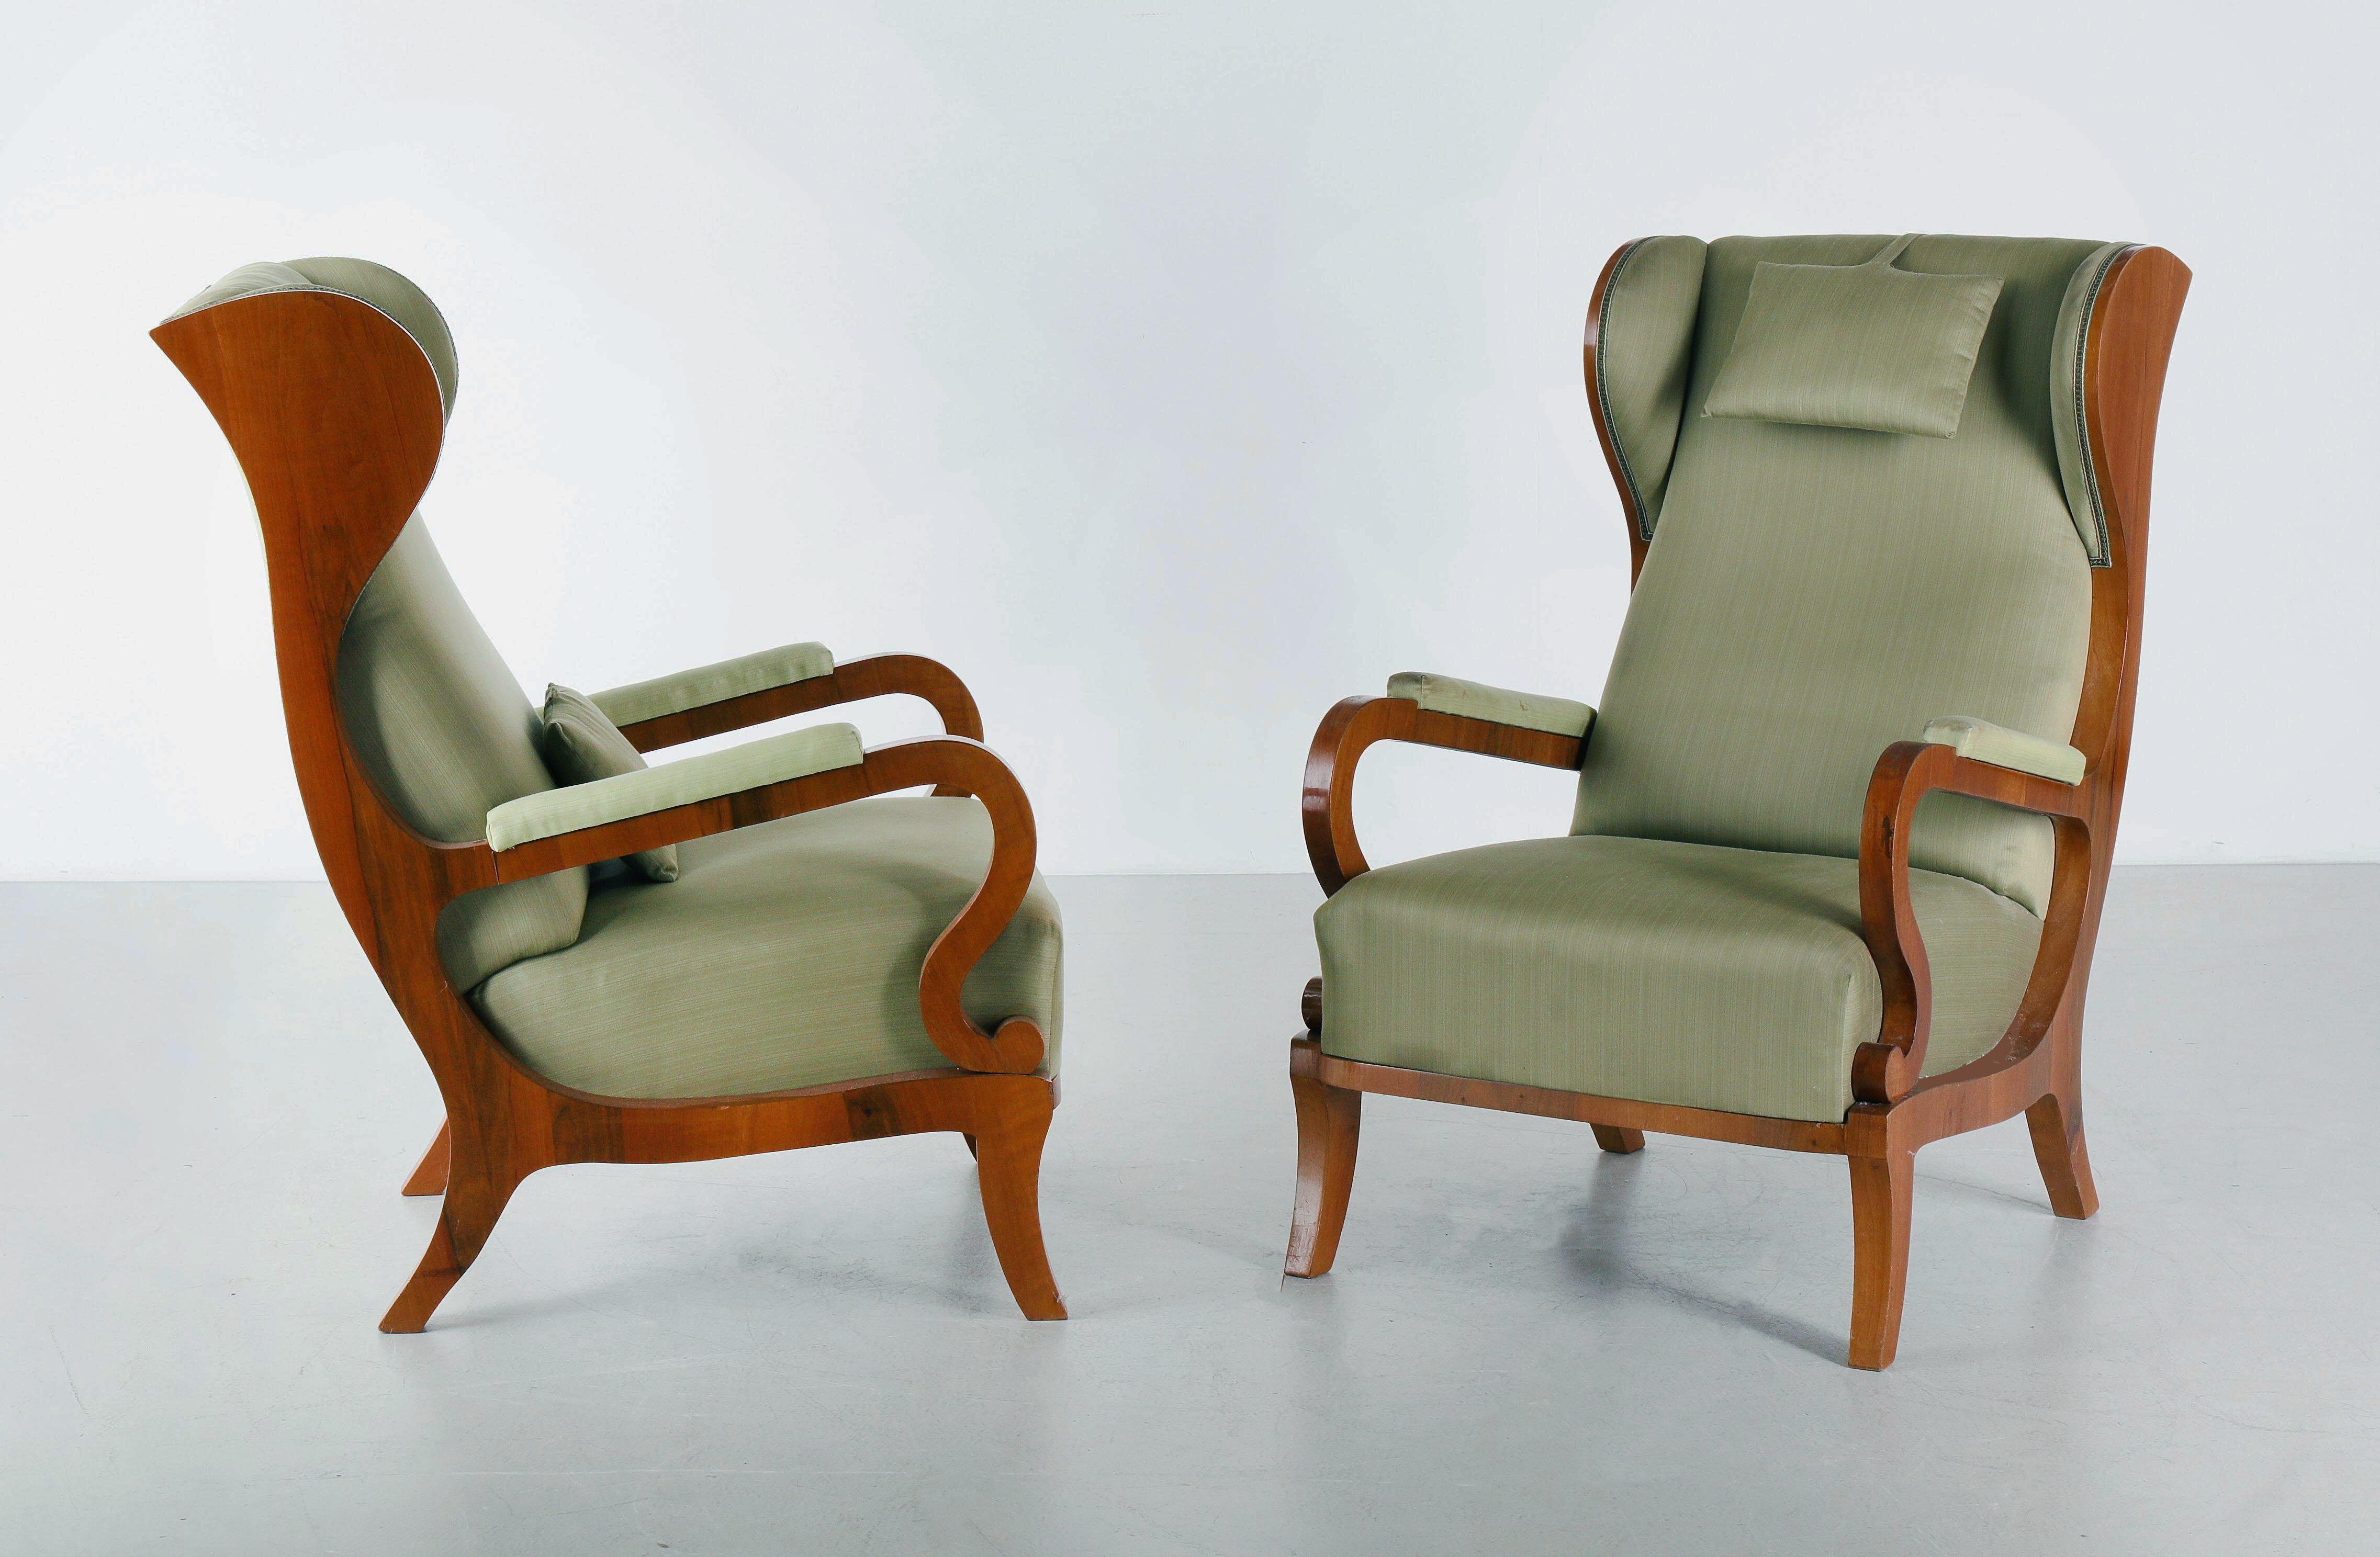 Hello,
This elegant pair of Viennese Biedermeier upholstered armchairs from c. 1825 are distinguished by their sophisticated proportions, rare and refined design and excellent craftsmanship and continue to have a great influence on modern